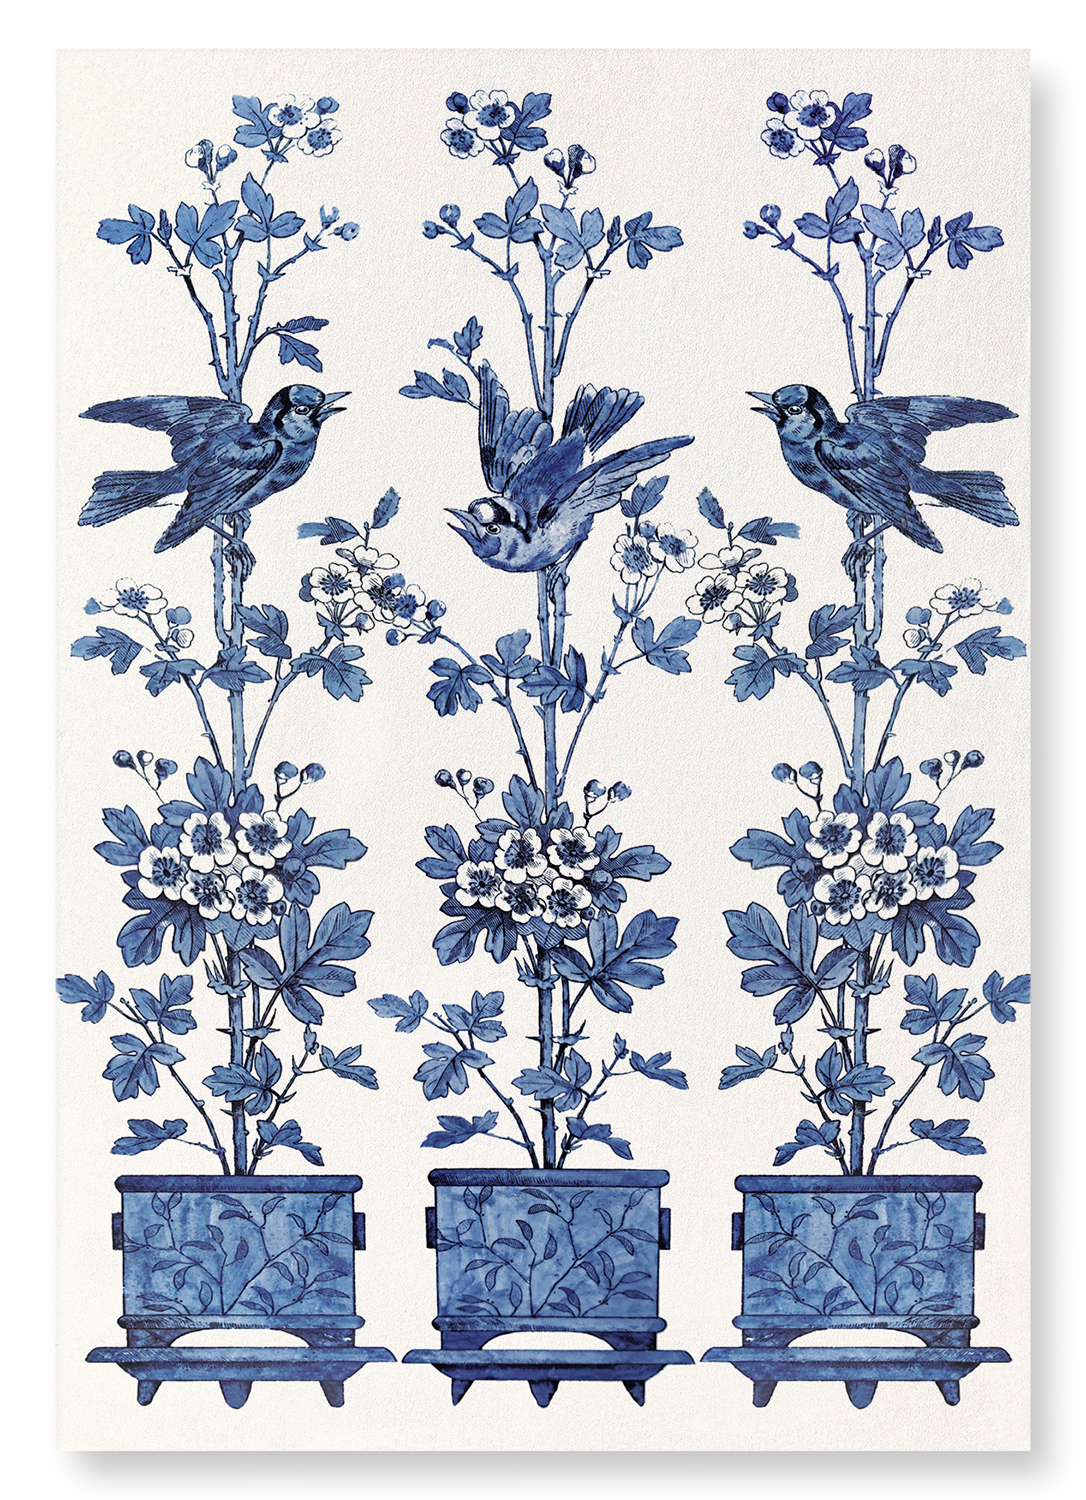 MINTON TILES BIRDS AND FLOWERS (LATE 19TH C.): Painting Art Print